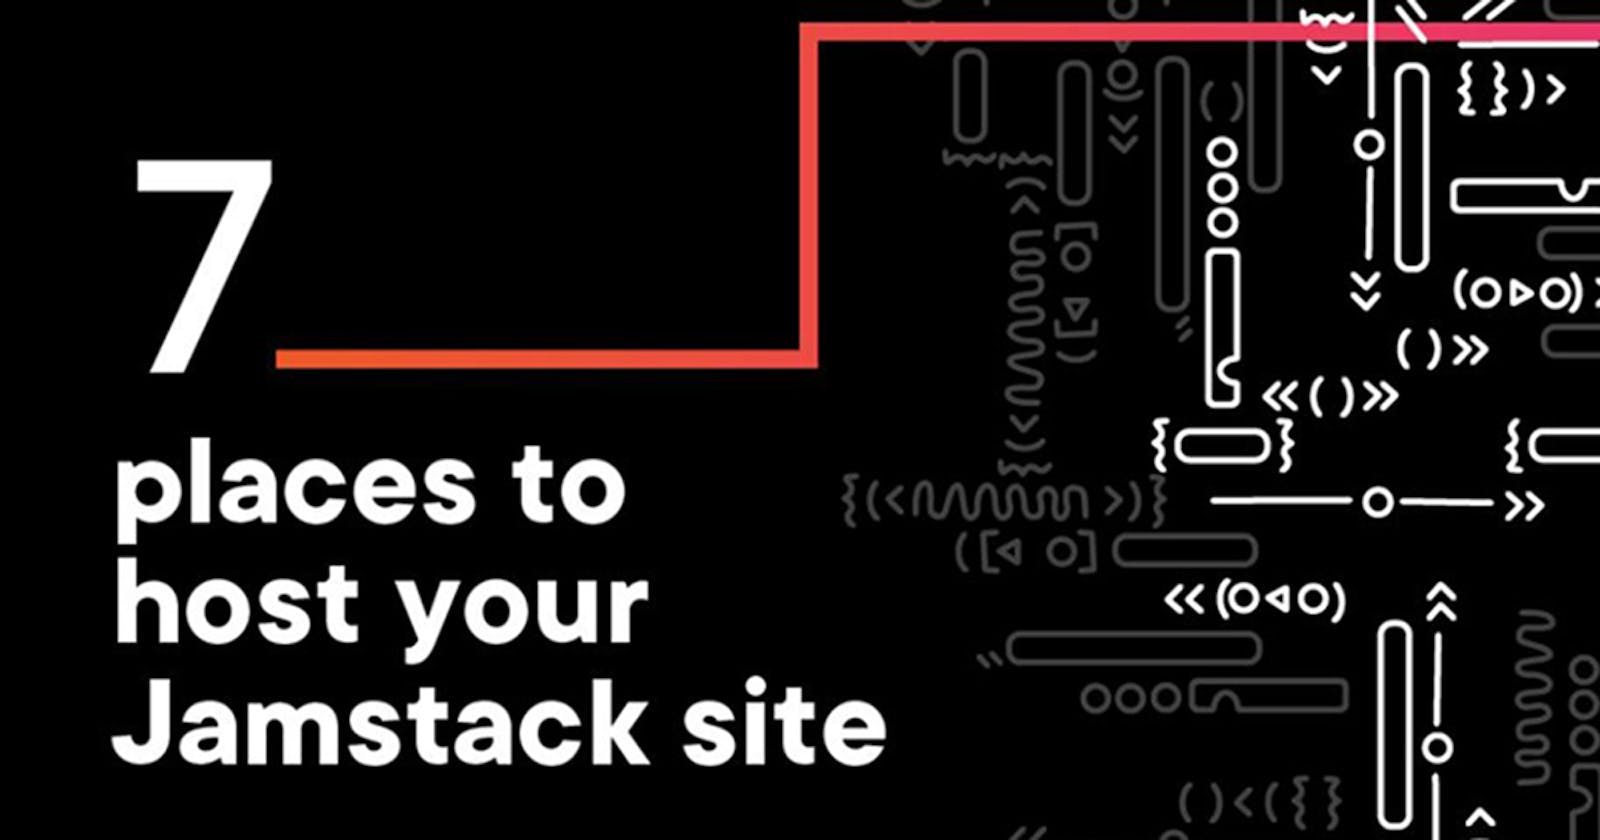 7 Places to Host Your Jamstack Site